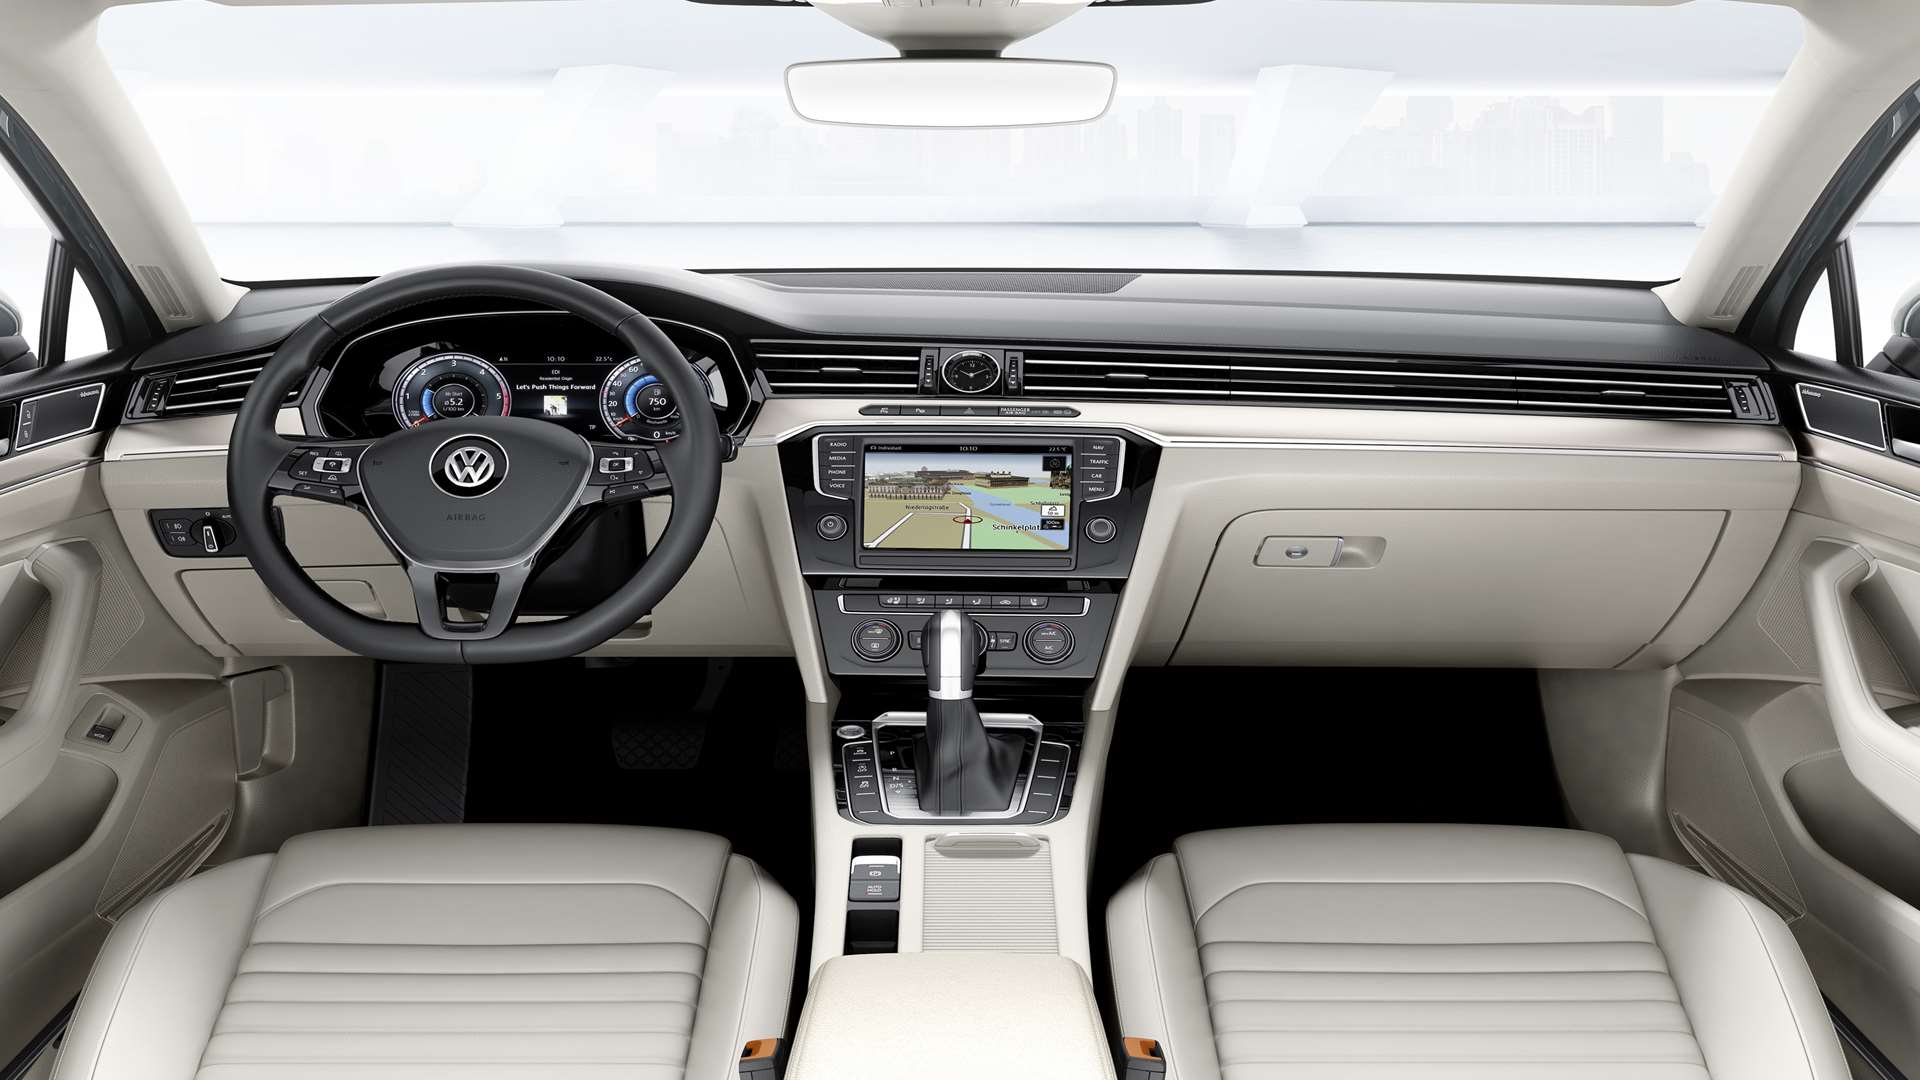 The centre of the dash is dominated by a six-and-a-half inch colour touchscreen